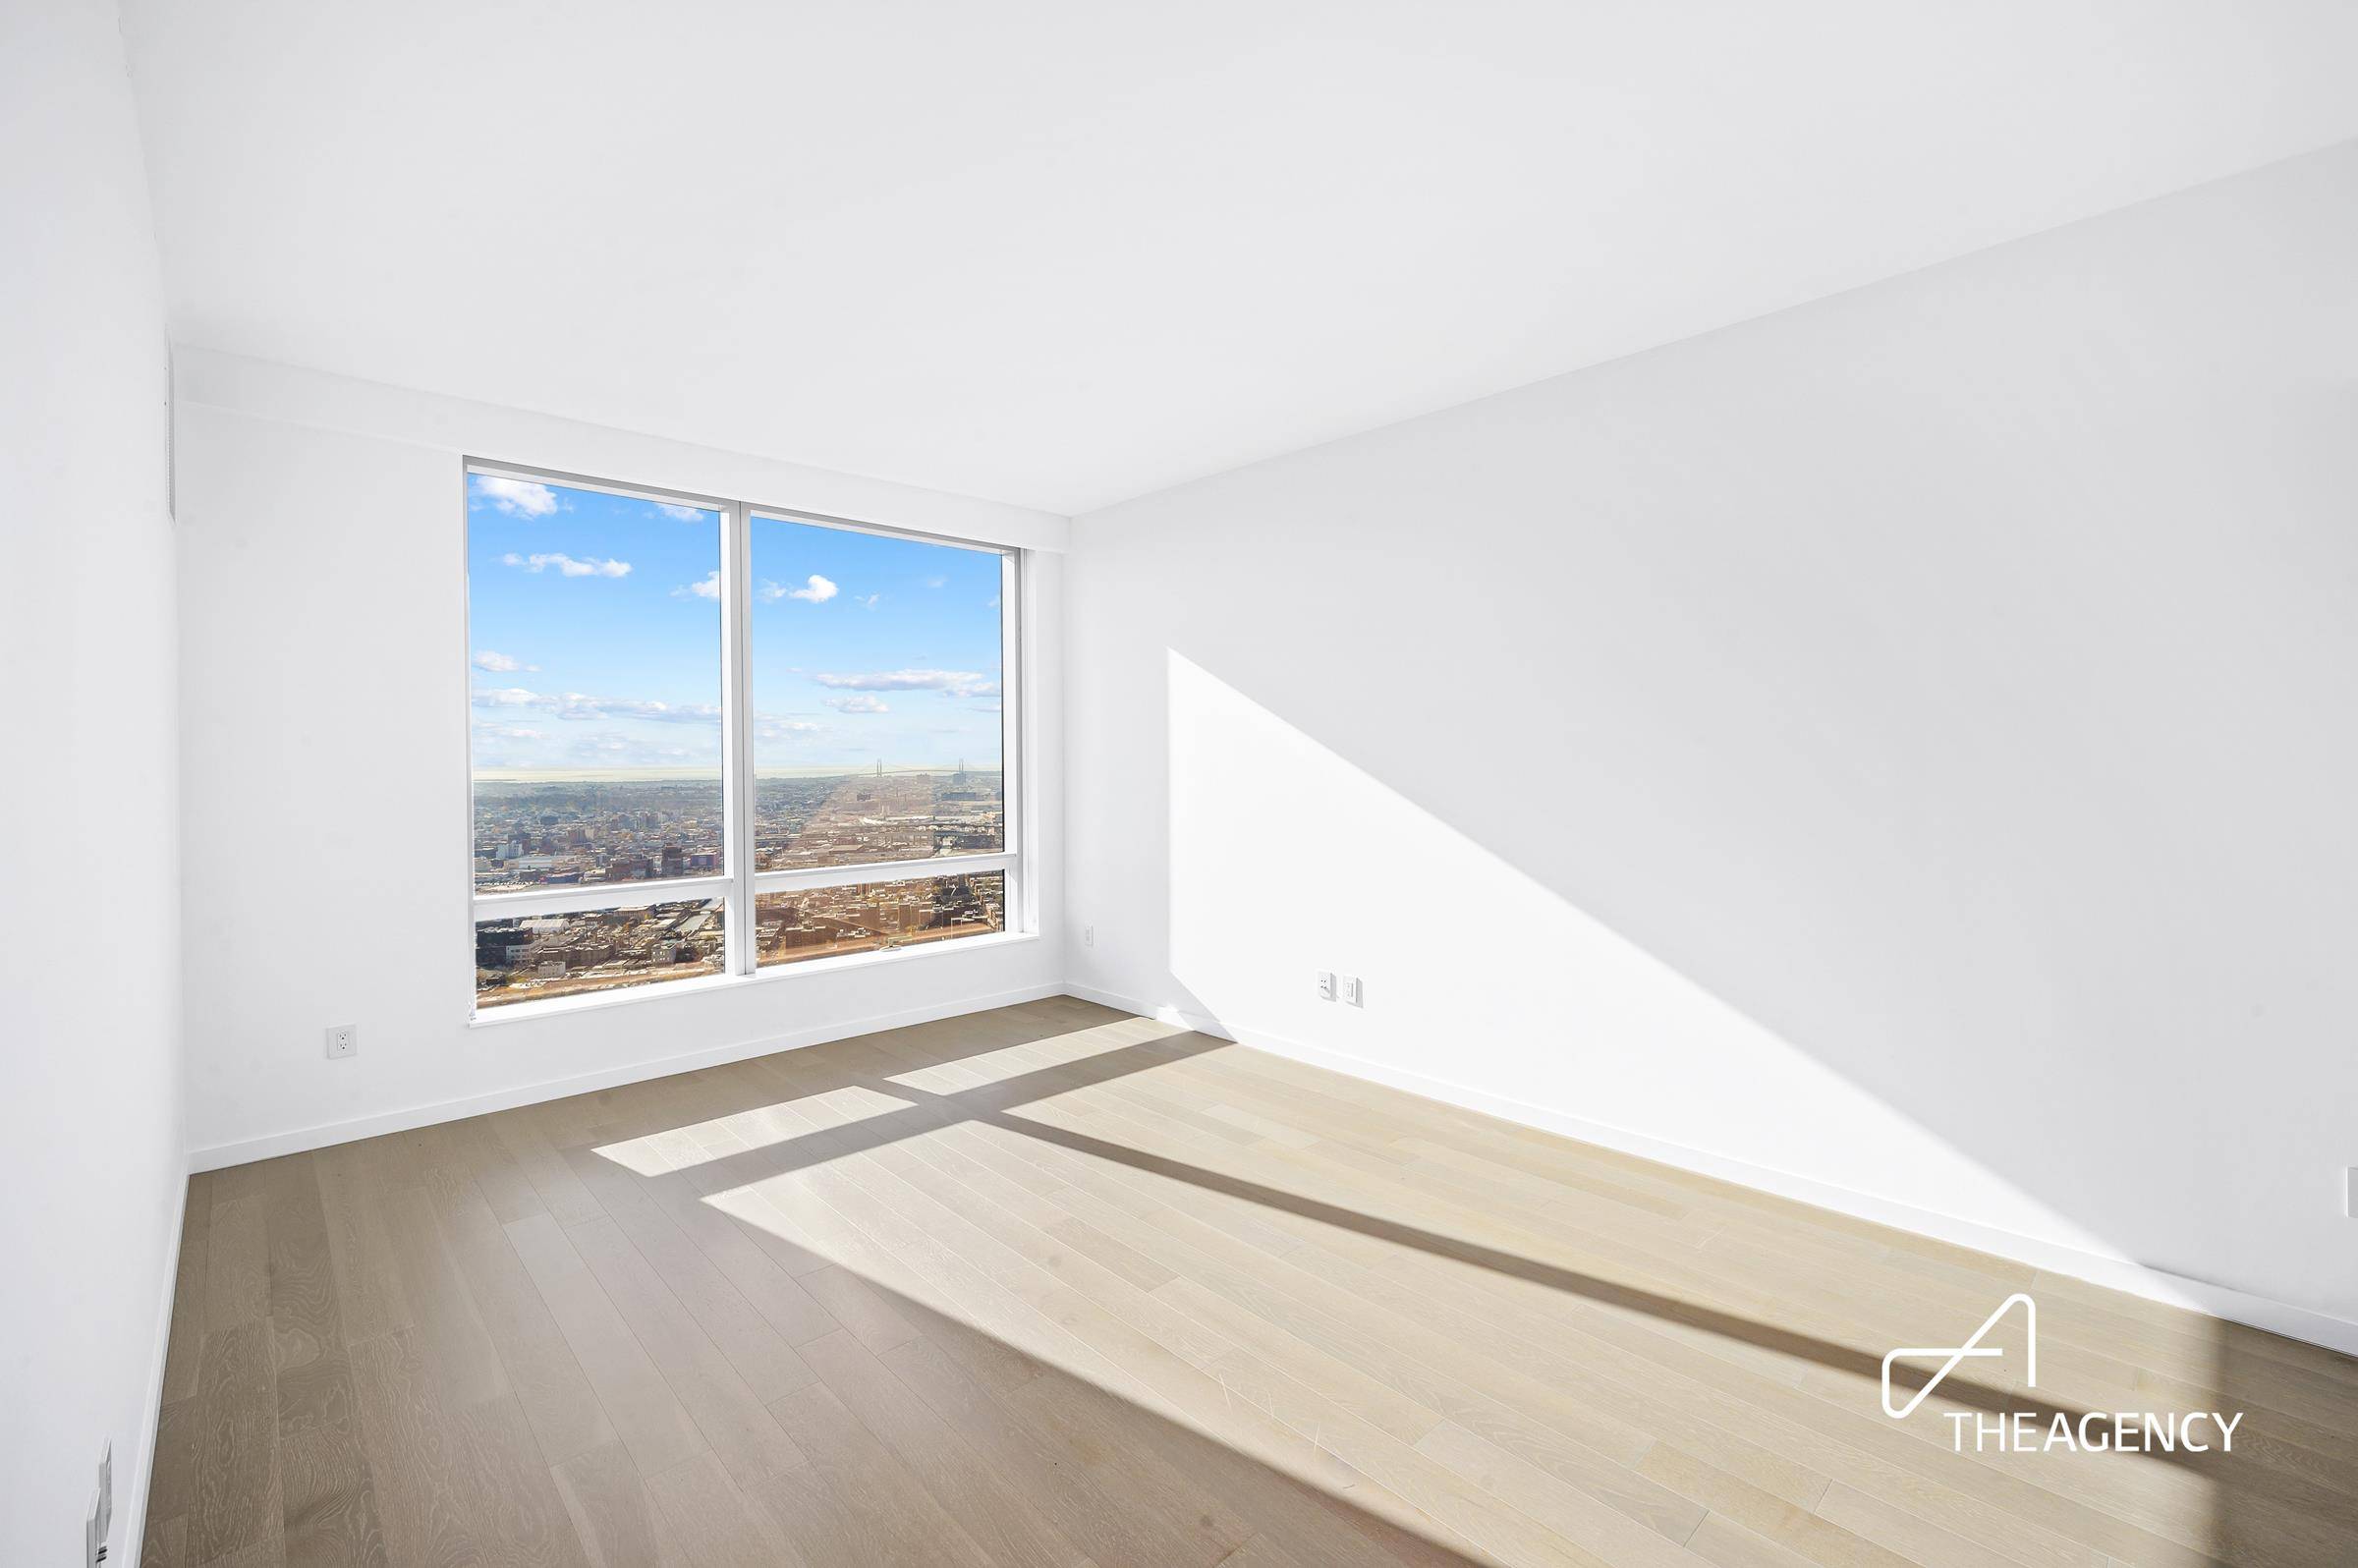 Sitting near the top of one of the tallest towers in Brooklyn you have views of the Atlantic Ocean, Prospect Park, and much of Brooklyn.